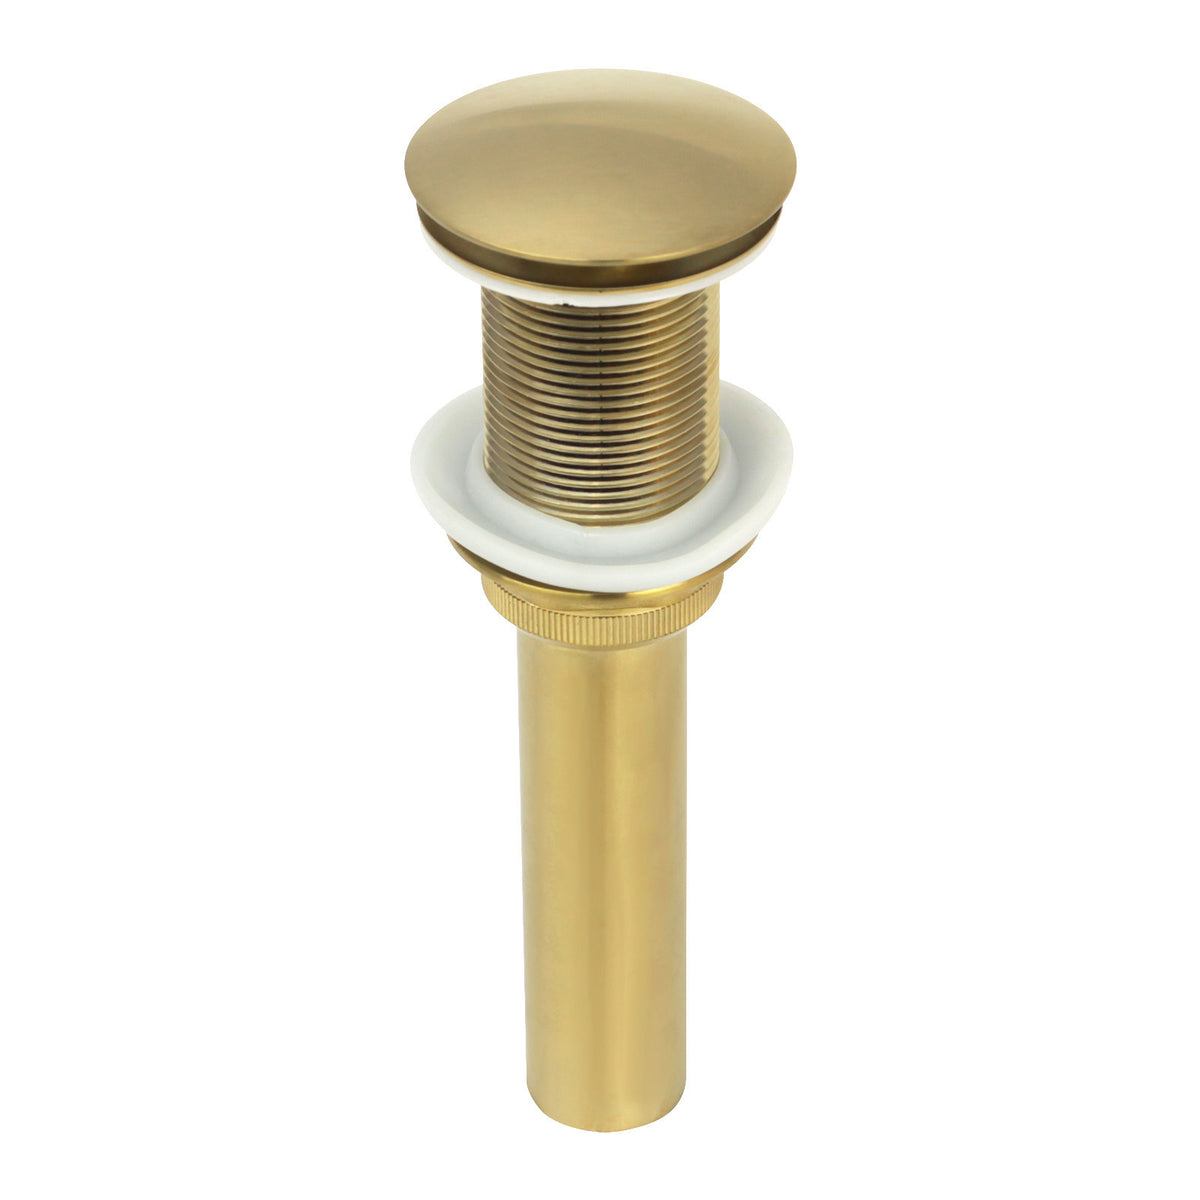 Brushed Gold Push Button Bathroom Sink Drain Stopper Without Overflow - AK82001BTG